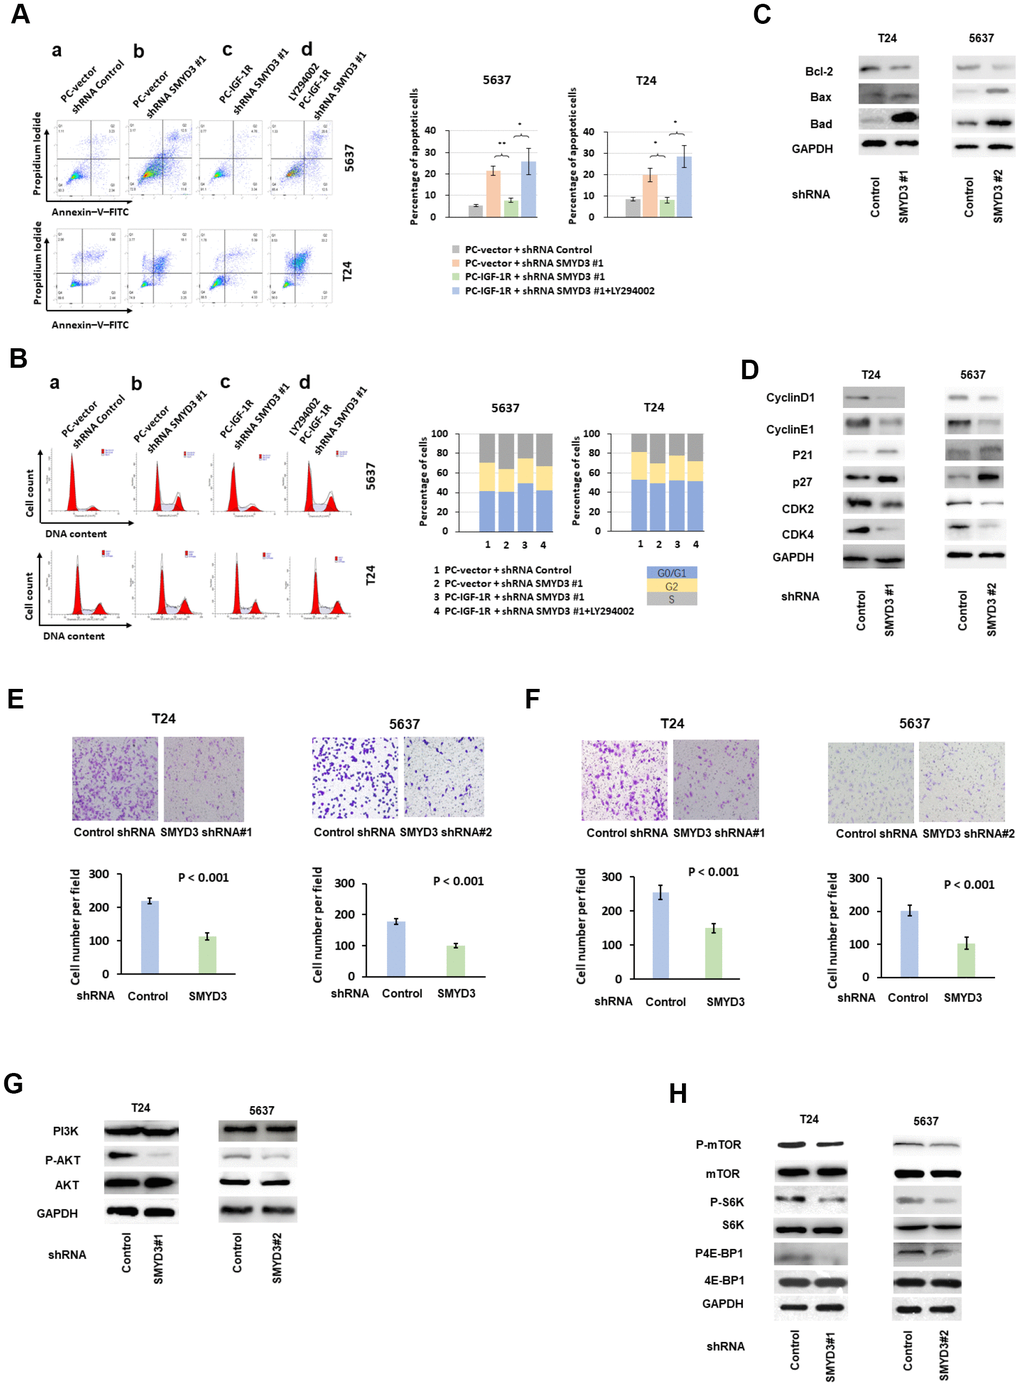 SMYD3 promotes tumorigenic phenotypes and activates AKT/mTOR signaling pathway in BC cells. (A) Left: representative images of PI/Annexin V staining of T24 and 5637 cells transfected with indicated vectors or treated with PI3K/AKT inhibitor LY294002(20μmol/L). Four independent experiments were performed for each cell line. Right: quantification of cells in apoptosis. Bar: SD, **: Pt test. (B) Representative examples of propidium iodide staining of T24 and 5637 cells as indicated above. Four independent experiments were performed for each cell line. The percentage of cells in each transfected population in each cycle phase was calculated (right panels). (C) Western blot analysis of Bcl-2, Bax and Bad protein expression in T24 and 5637 cells transfected with SMYD3-shRNA or con-shRNA. (D) Western blot analysis of cyclin D1, cyclin E1, p21, p27 CDK2 and CDK4 protein expression in T24 and 5637 cells transfected with SMYD3-shRNA or control shRNA. GAPDH served as a loading control. (E) Transwell migration assays of T24 and 5637 cell lines. Upper: representative images of Transwell migration assays of BC cells 48 h after incubation. Lower: The cells that migrated to the lower compartment were counted in by light microscopy at X 40 magnification. Tweleve representative fields were analyzed for each well after 48 h of incubation (n=4). Bar: SD, t test. (F) Upper: Representative images of Transwell invasion assays of BC cells 48 h after incubation. Lower: Transwell invasion assays of T24 and 5637 cell lines. The cells were counted in 12 representative fields for each well after 48 h of incubation (n=4). Bar: SD, t test. (G) Western blot analysis of PI3K, phosphorylated-AKT (P-AKT) and AKT protein expression in T24 and 5637 cells transfected with SMYD3 shRNA or control shRNA. Three independent experiments were performed. (H) Western blot analysis of p-mTOR, mTOR, p70, S6K, p4E-BP1 and 4E-BP1 protein expression in T24 and 5637 cells transfected with SMYD3 shRNA or control shRNA. GAPDH served as a loading control. p-S6K, phosphorylated S6K; p4E-BP1, phosphorylated 4E-BP1. Three independent experiments were performed.